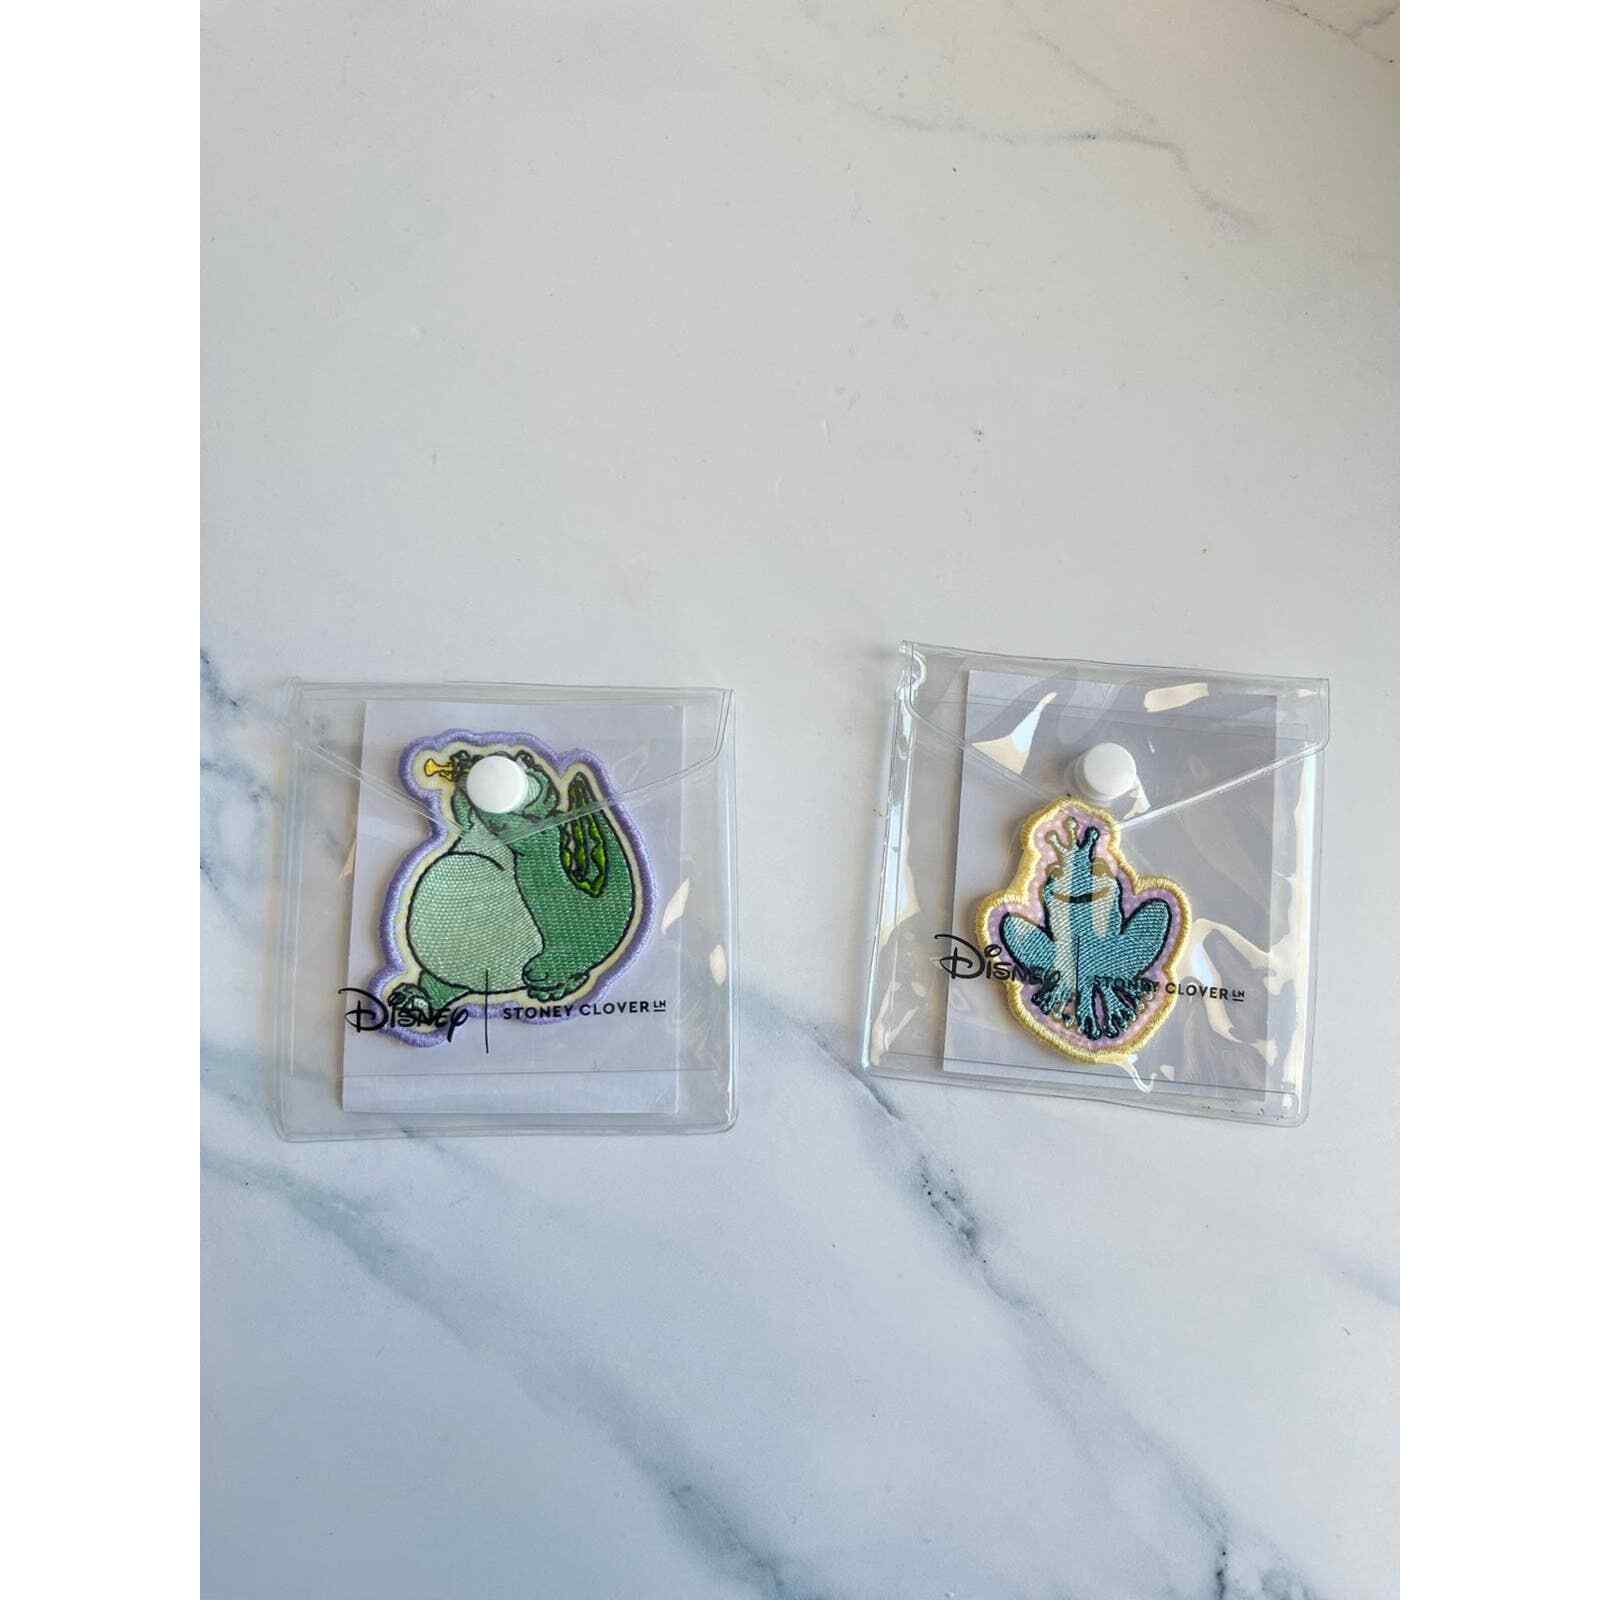 Disney Stony Clover Princess and the Frog Patch set